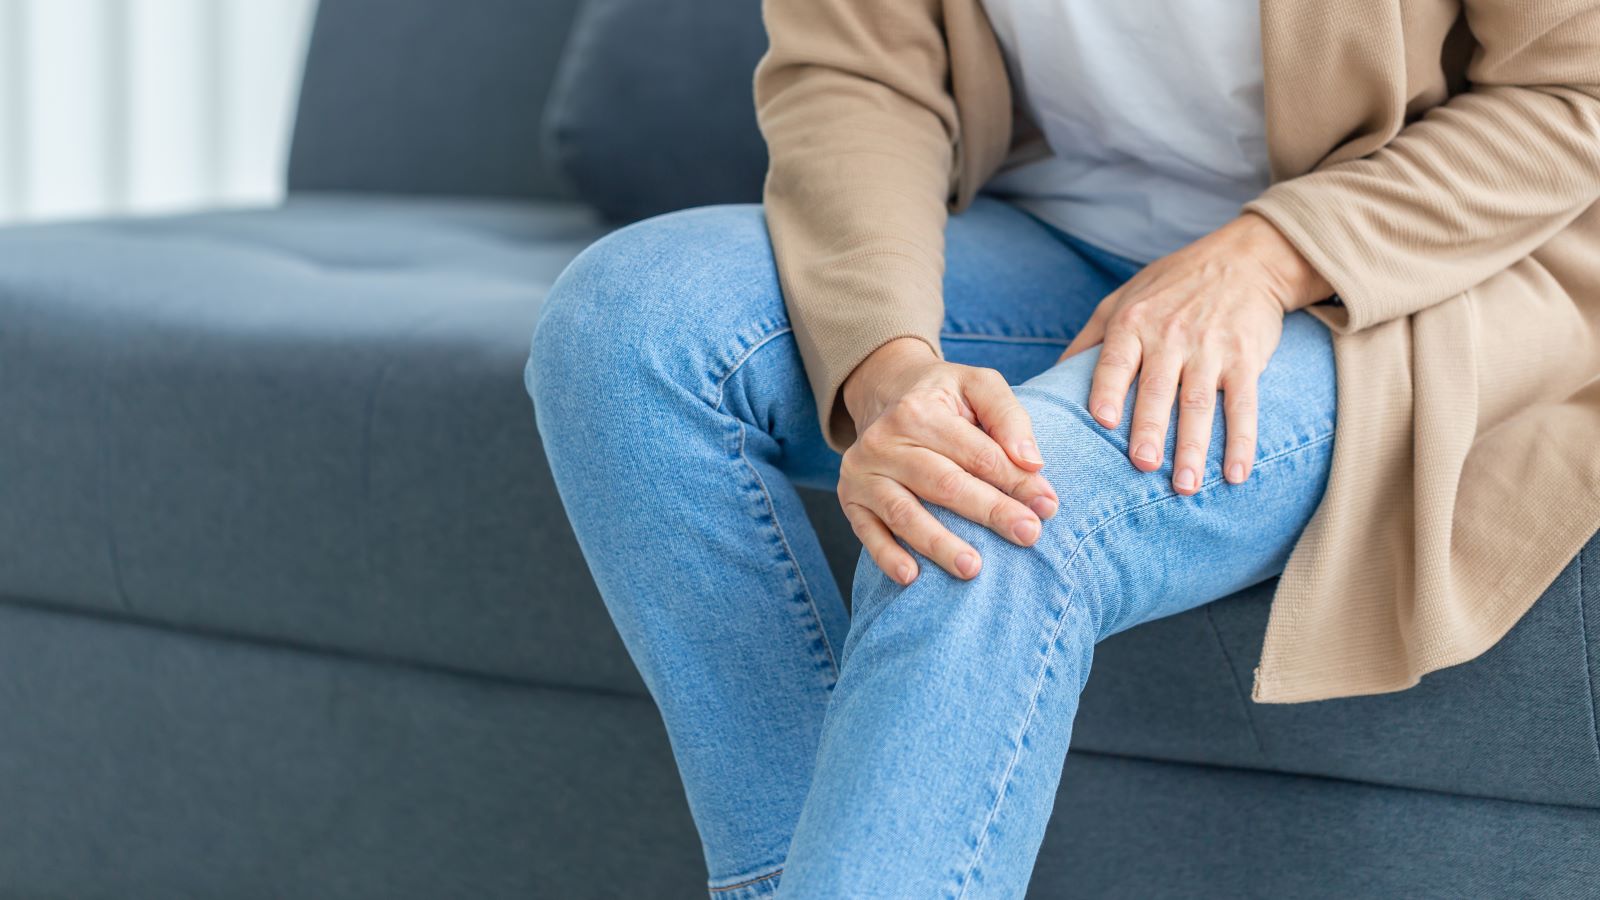 Knee pain is common, and home remedies can help improve it quickly and easily. Here are three simple steps you can take to feel better.